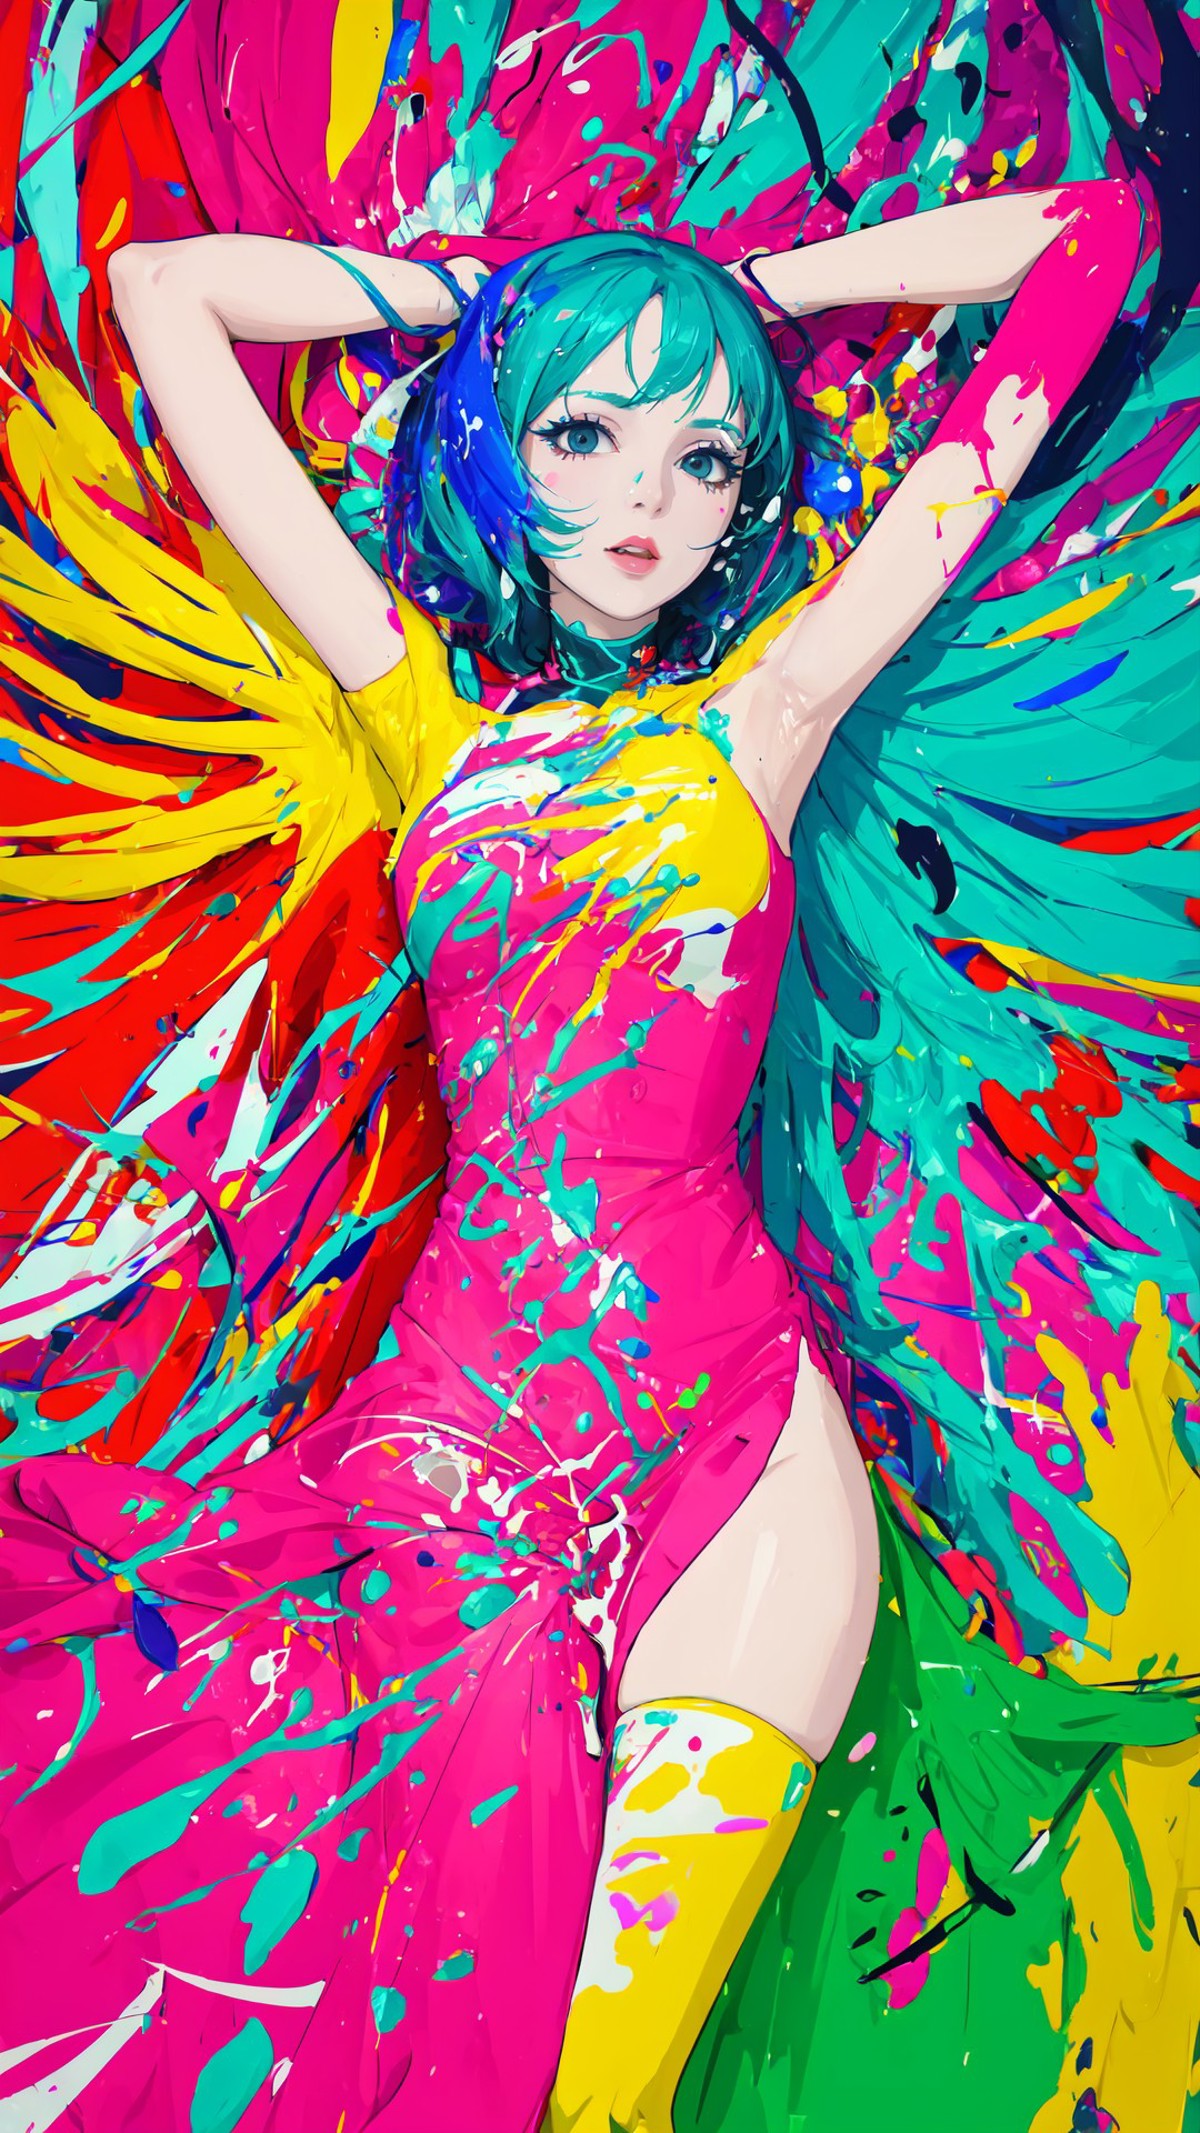 A blue-haired girl in a pink dress with wings painted on her back.